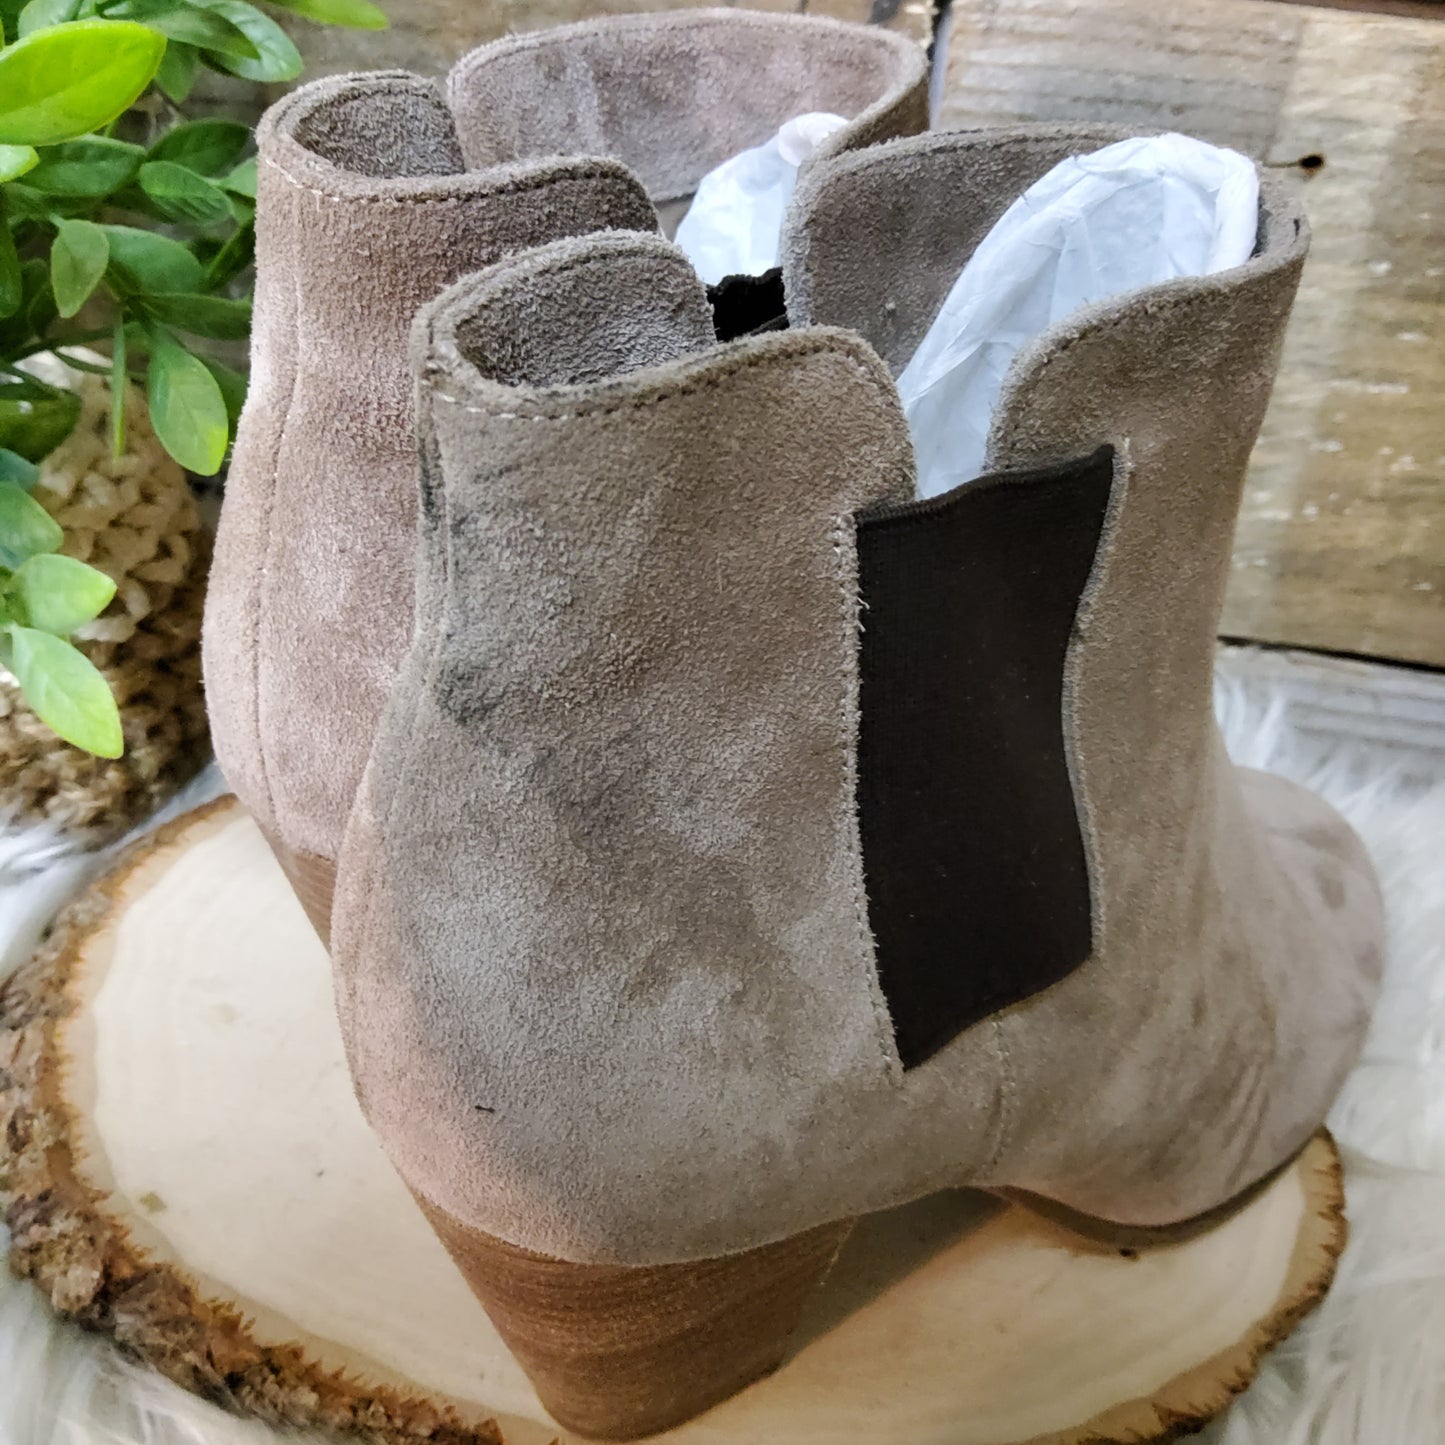 Sole Society Suede Booties Sz 7.5